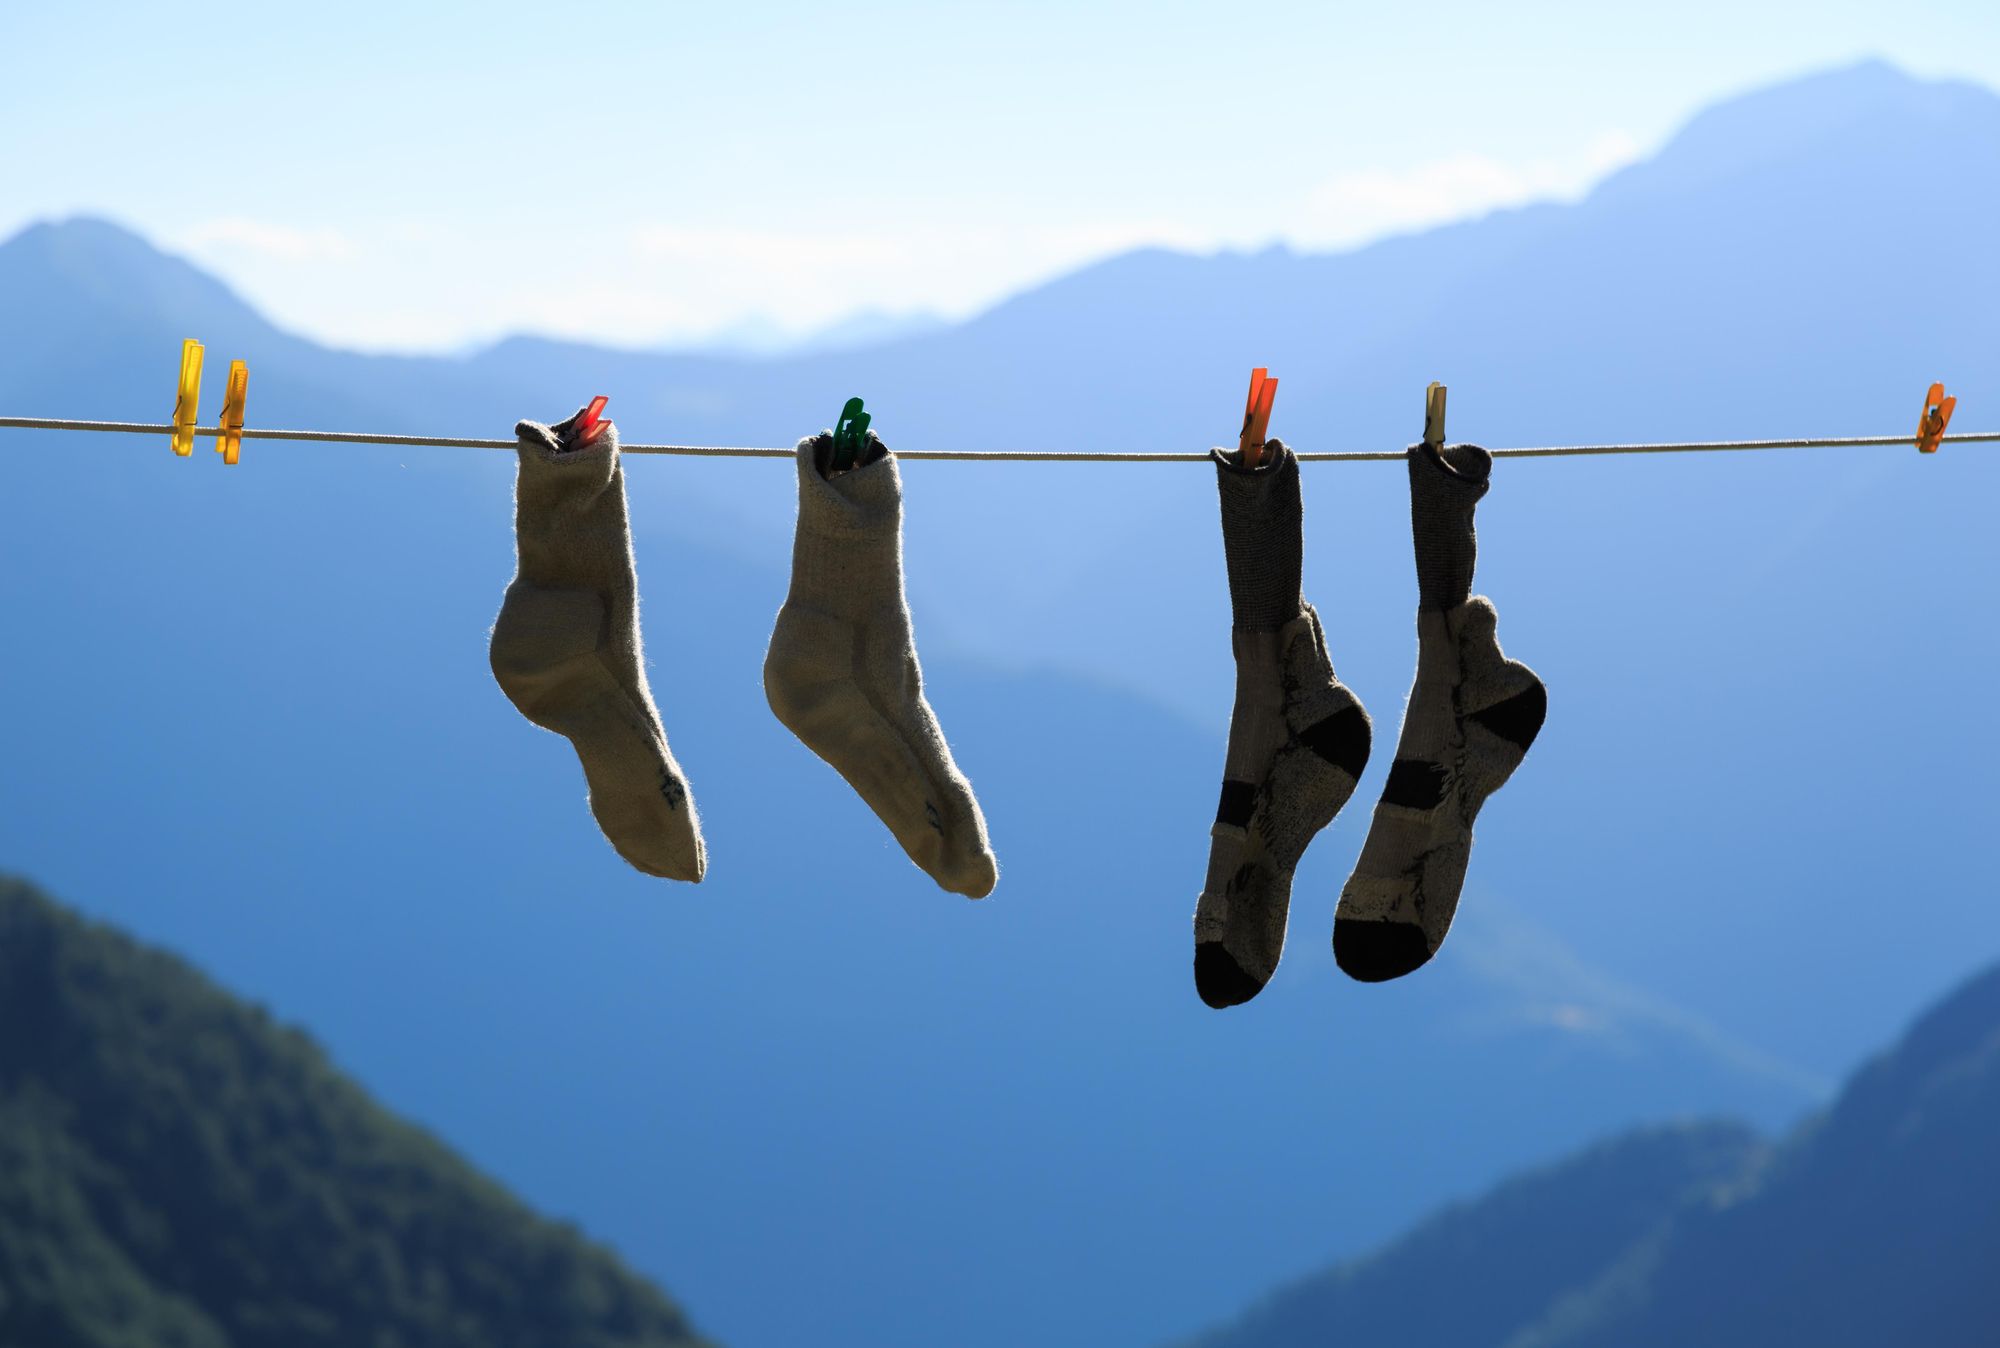 Two pair of socks drying on a clothes line during an adventurous hike in the mountains. Photo: Getty